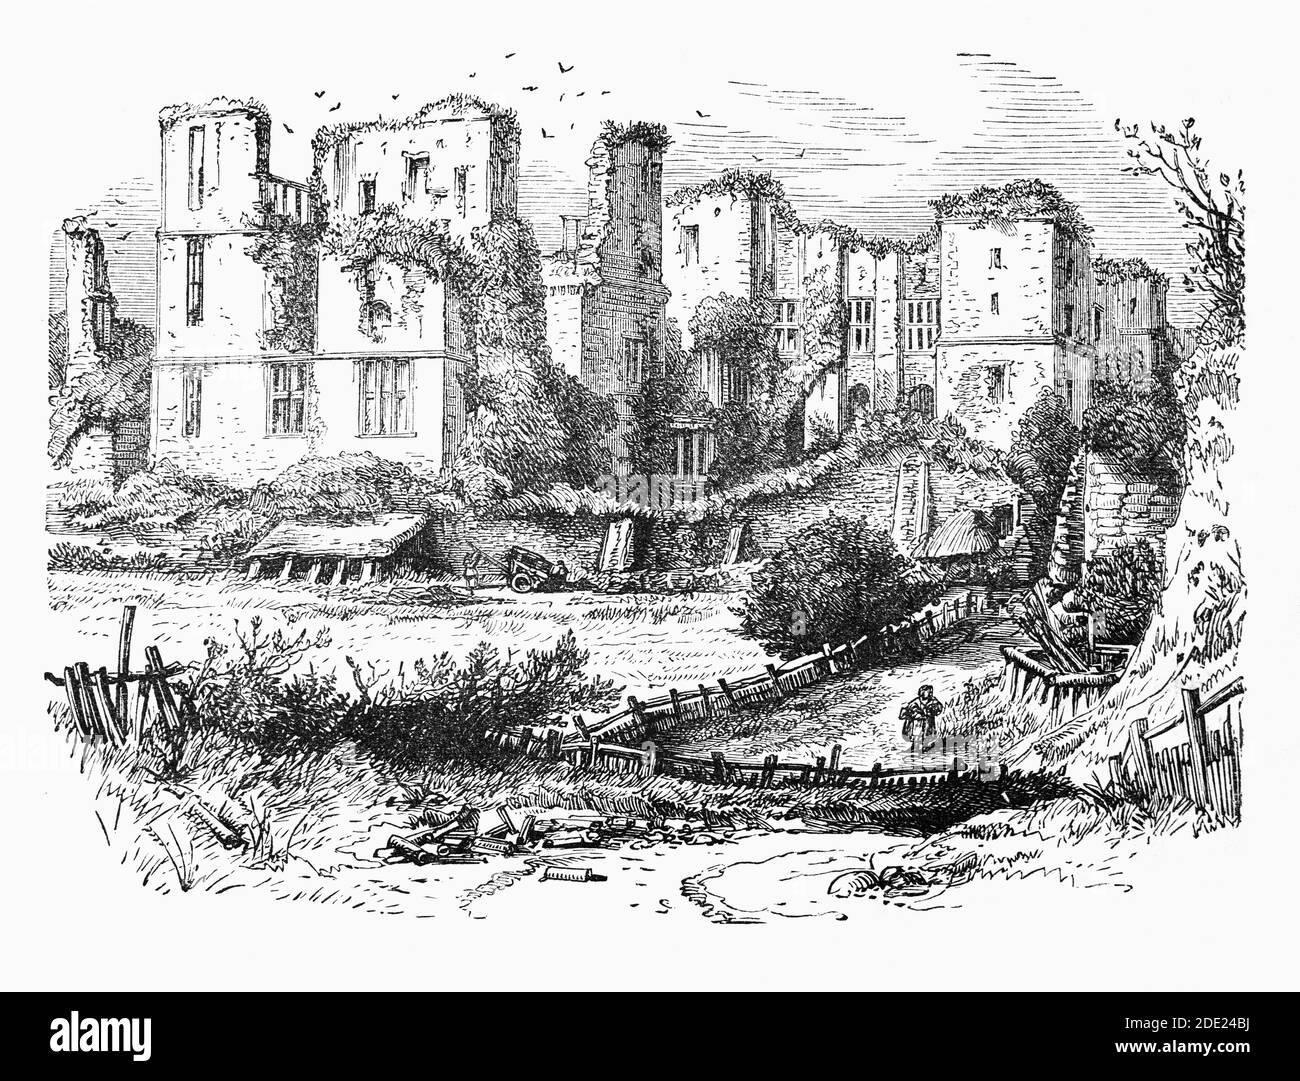 A 19th Century view of Kenilworth Castle in Warwickshire, England. Built over several centuries, it was founded in the 1120s around a powerful Norman great tower, then significantly enlarged by King John at the beginning of the 13th century. In the late 14th century, John of Gaunt turned the medieval castle into a palace fortress, then the Earl of Leicester then expanded the castle in the 16th century, constructing new Tudor buildings and exploiting the medieval heritage of Kenilworth to produce a fashionable Renaissance palace. Stock Photo